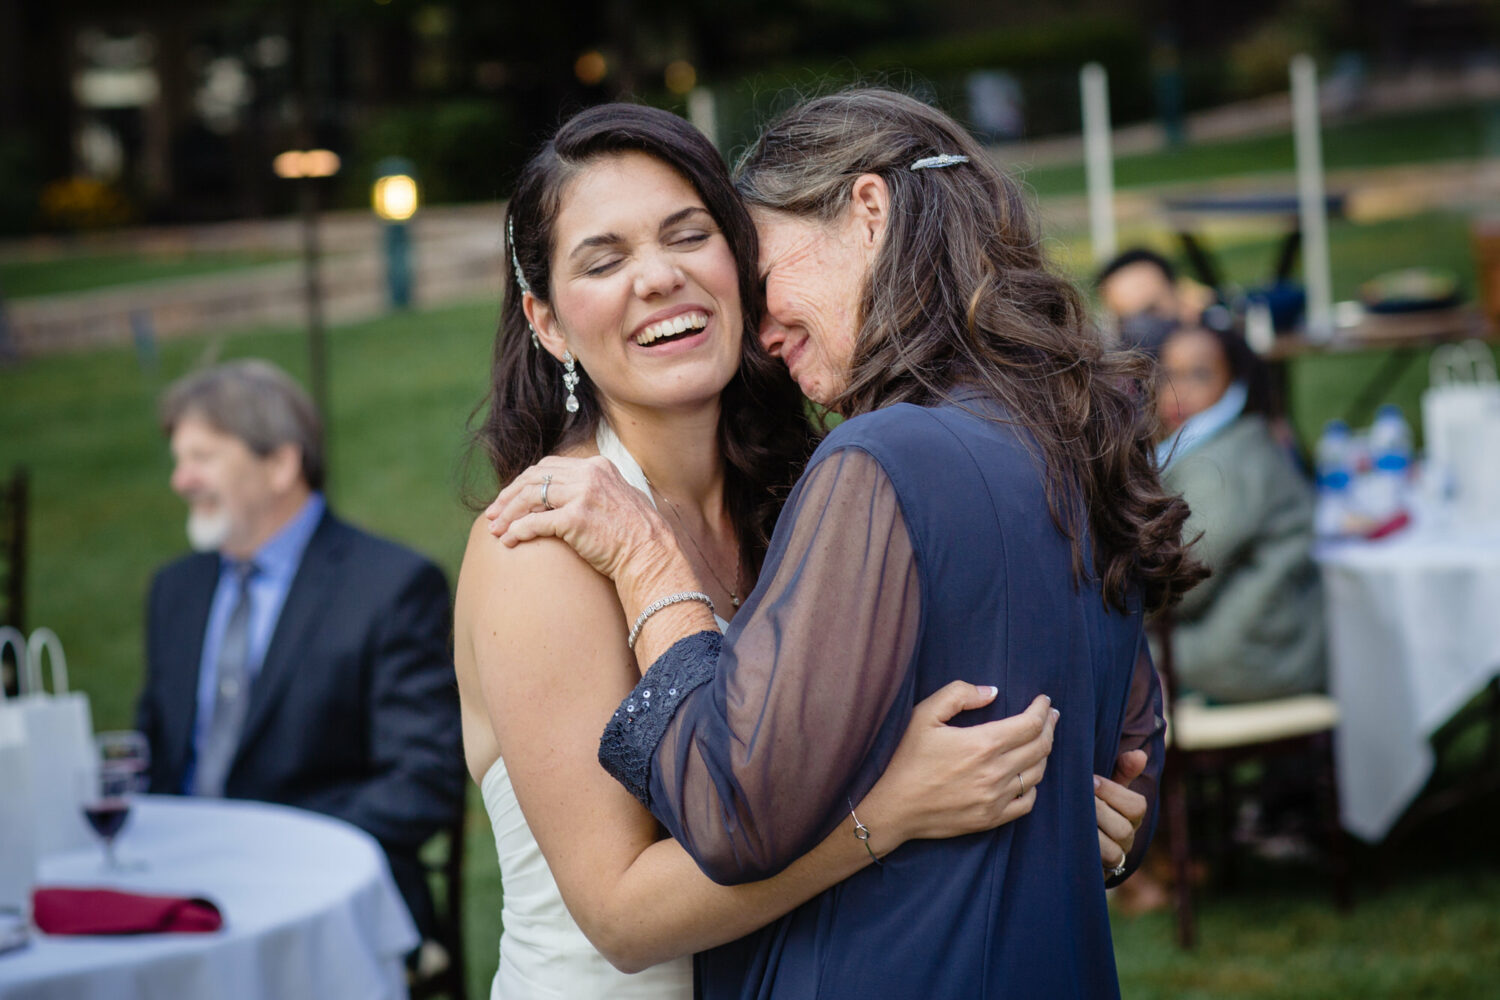 An emotional moment shared between the bride and her mom during their dance at the reception.